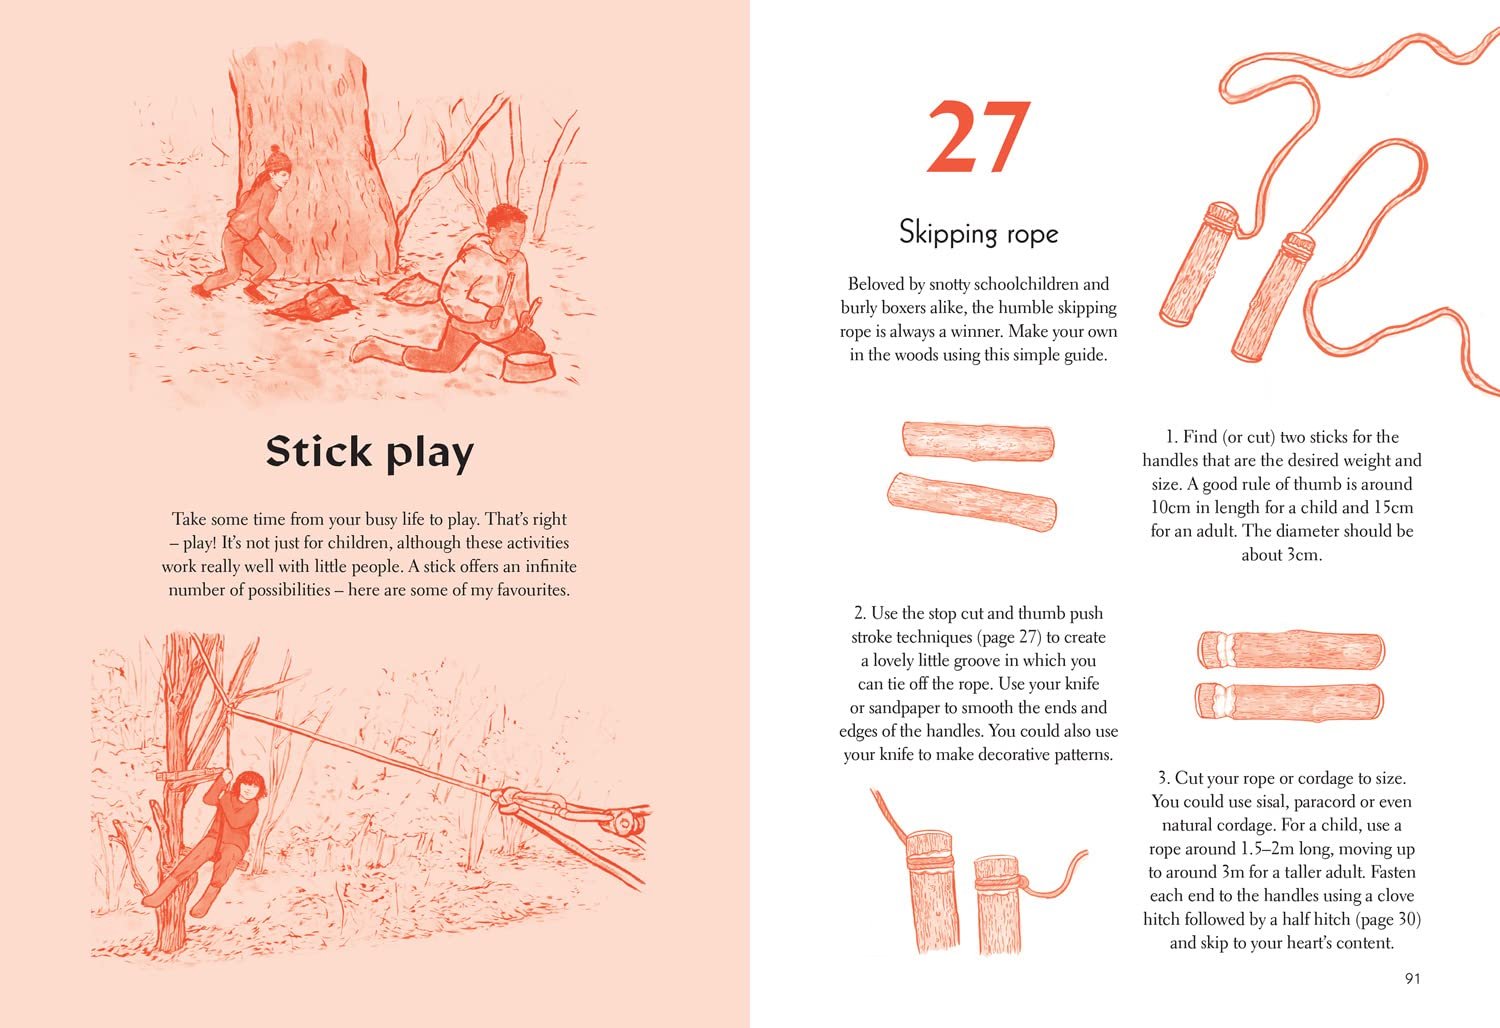 50 Things to do with a Stick Maria Nilsson Illustration 4.jpeg